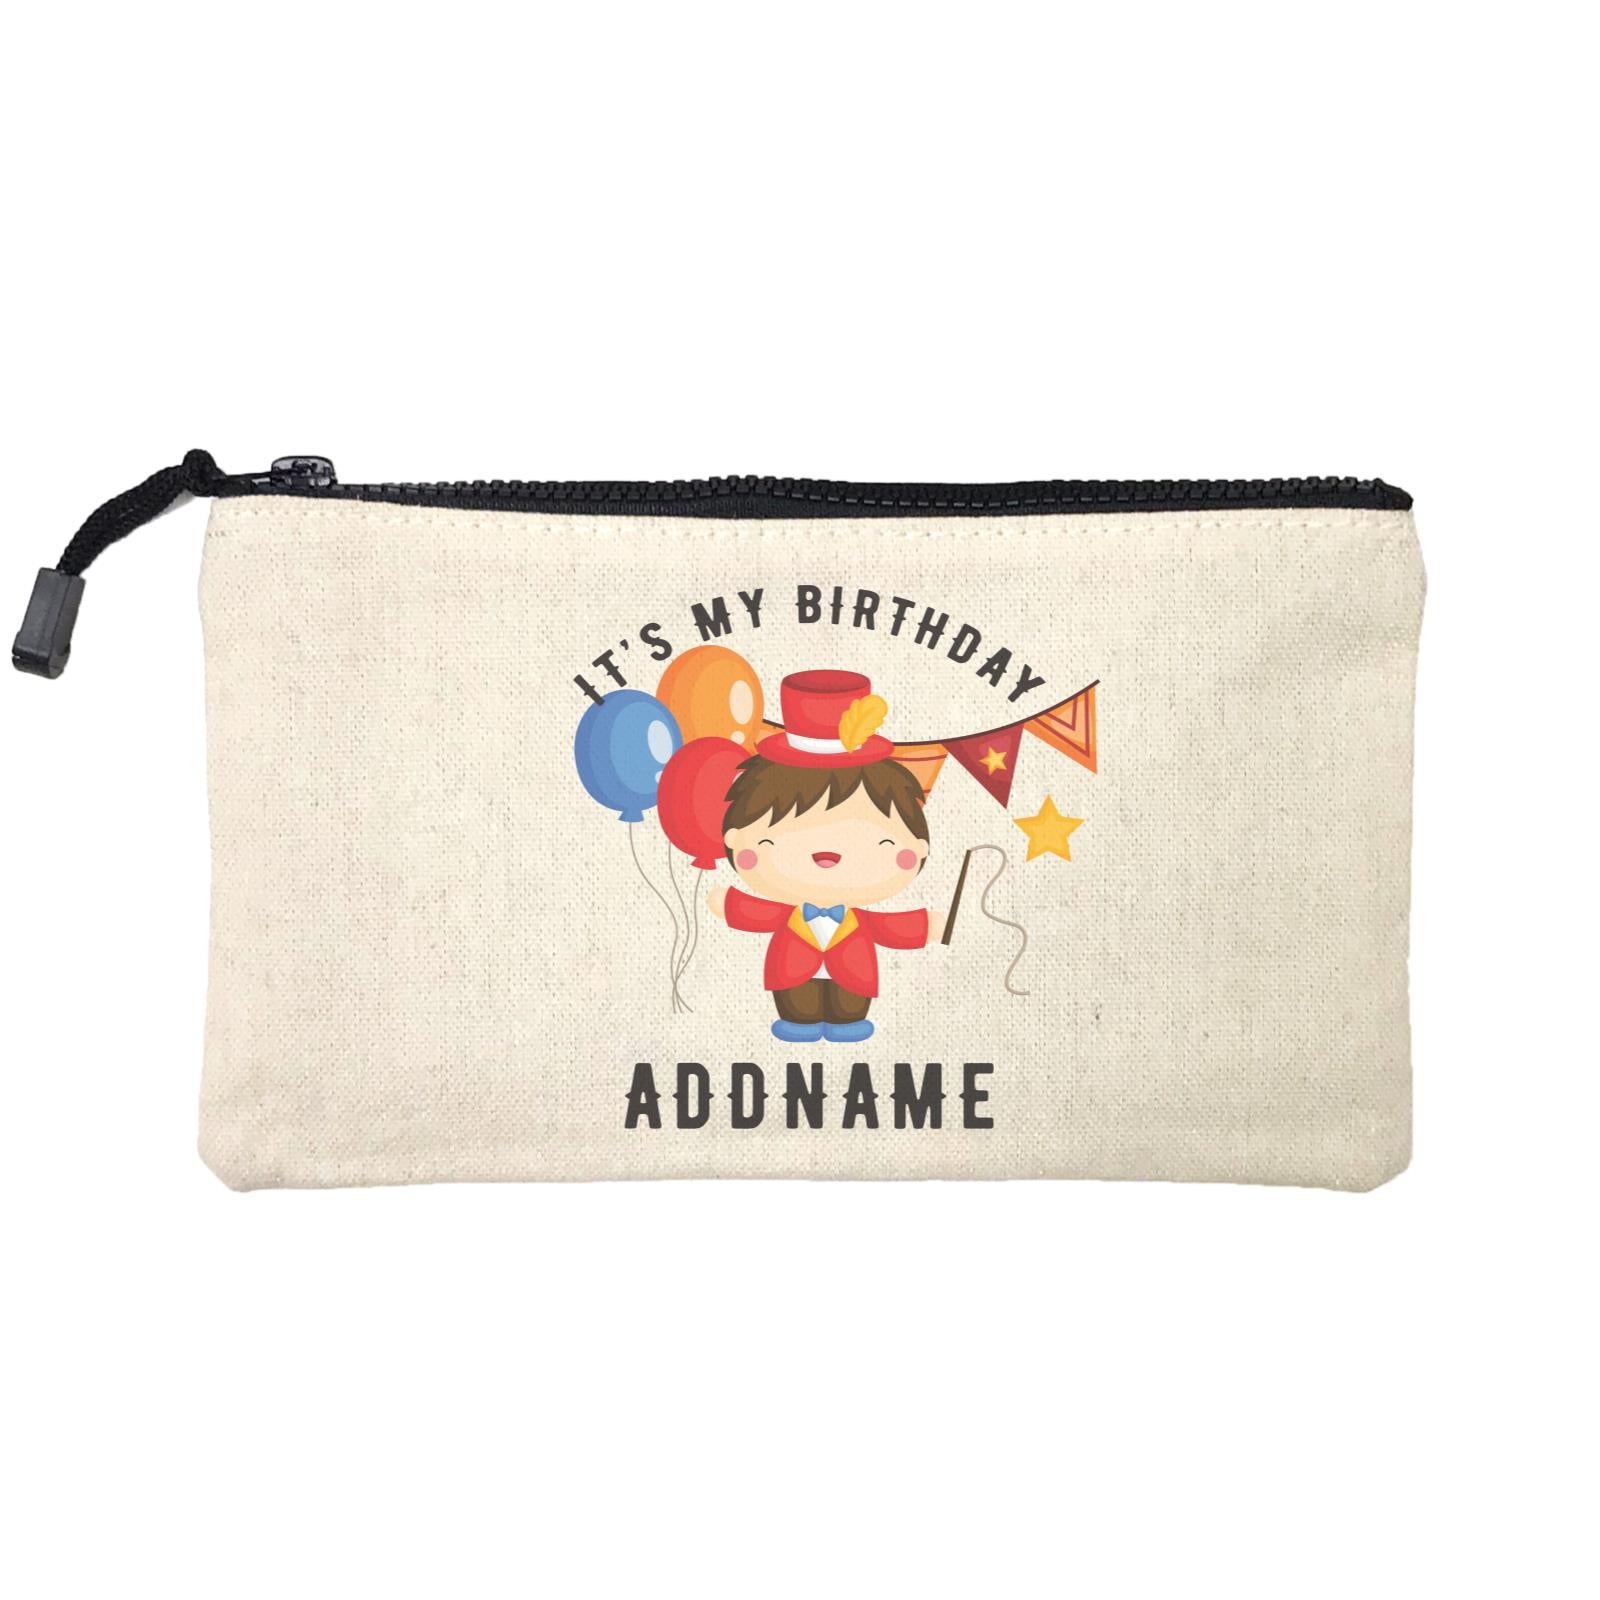 Birthday Circus Happy Boy Leader of Performance It's My Birthday Addname Mini Accessories Stationery Pouch